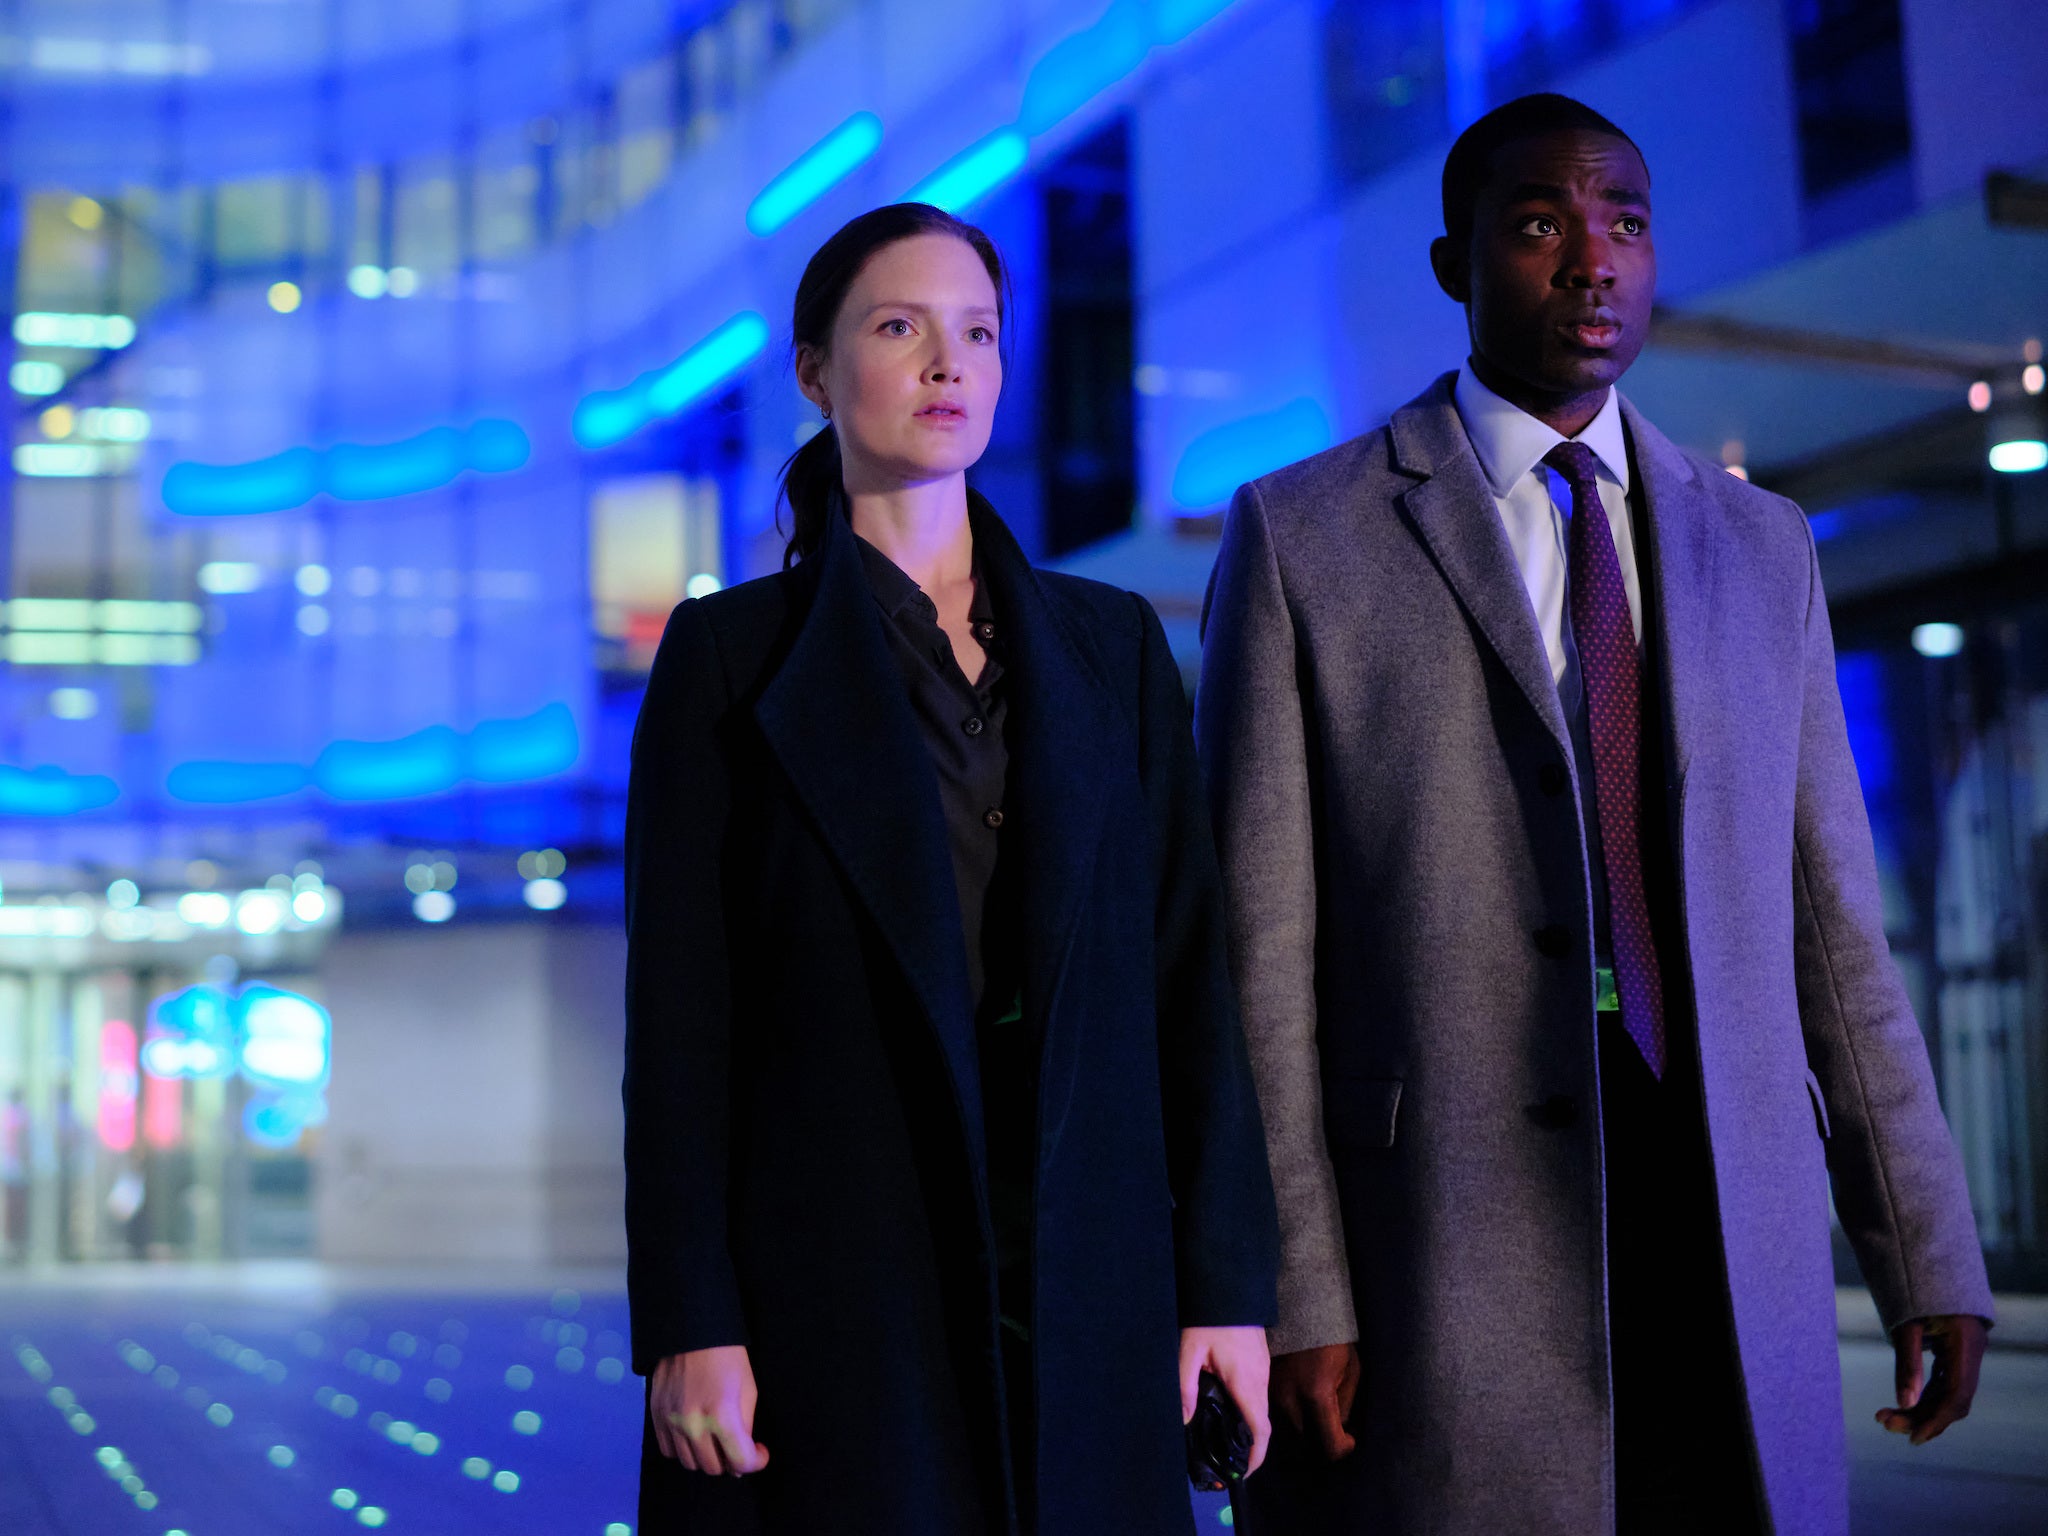 Holliday Grainger and Paapa Essiedu in ‘The Capture’